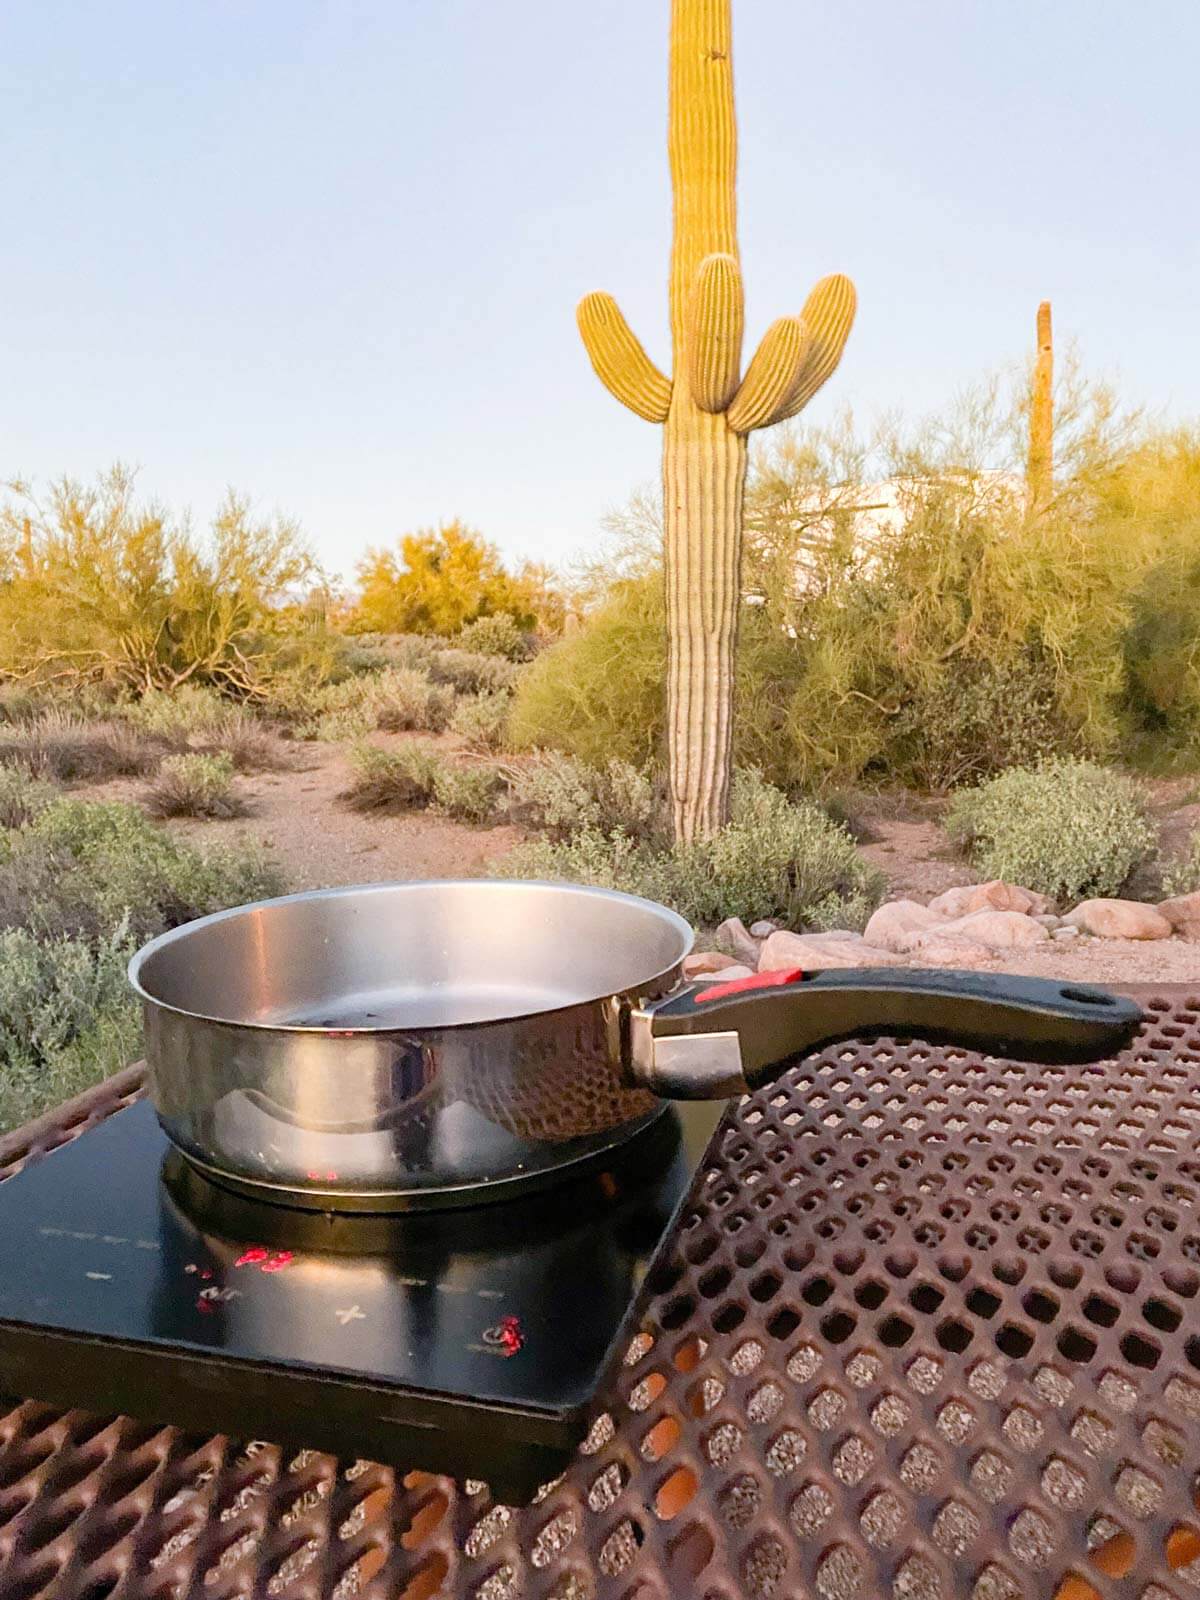 induction plate at campsite on outdoor table with pan heating oil on top